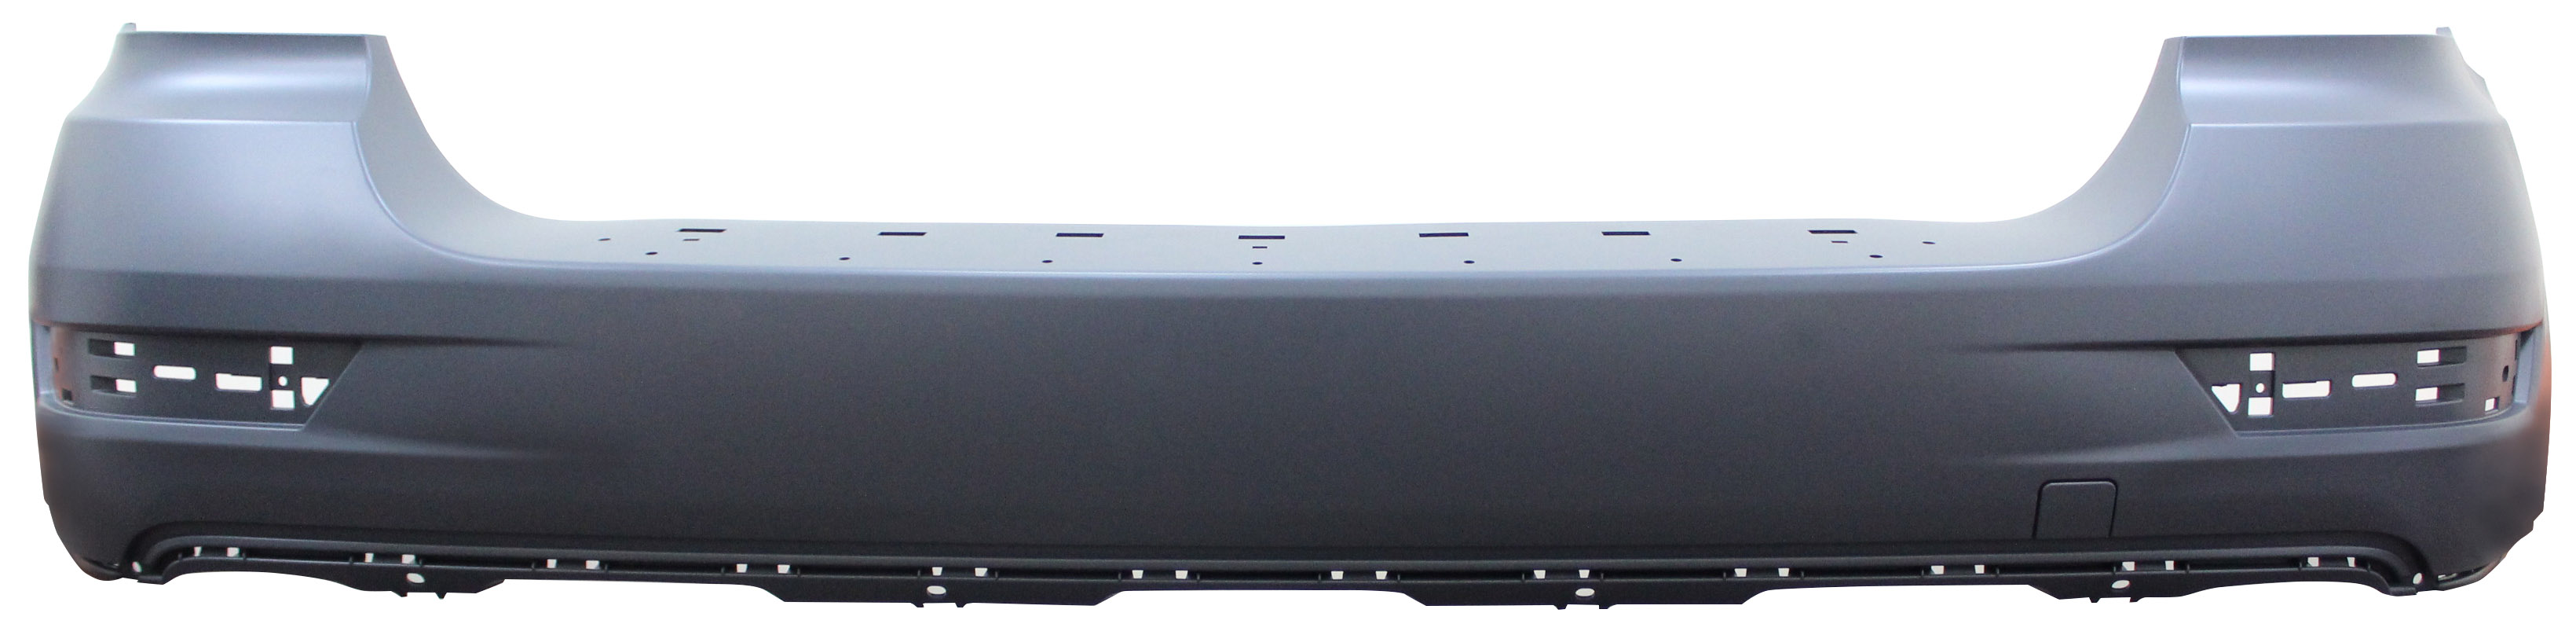 Aftermarket BUMPER COVERS for MERCEDES-BENZ - ML550, ML550,08-11,Rear bumper cover